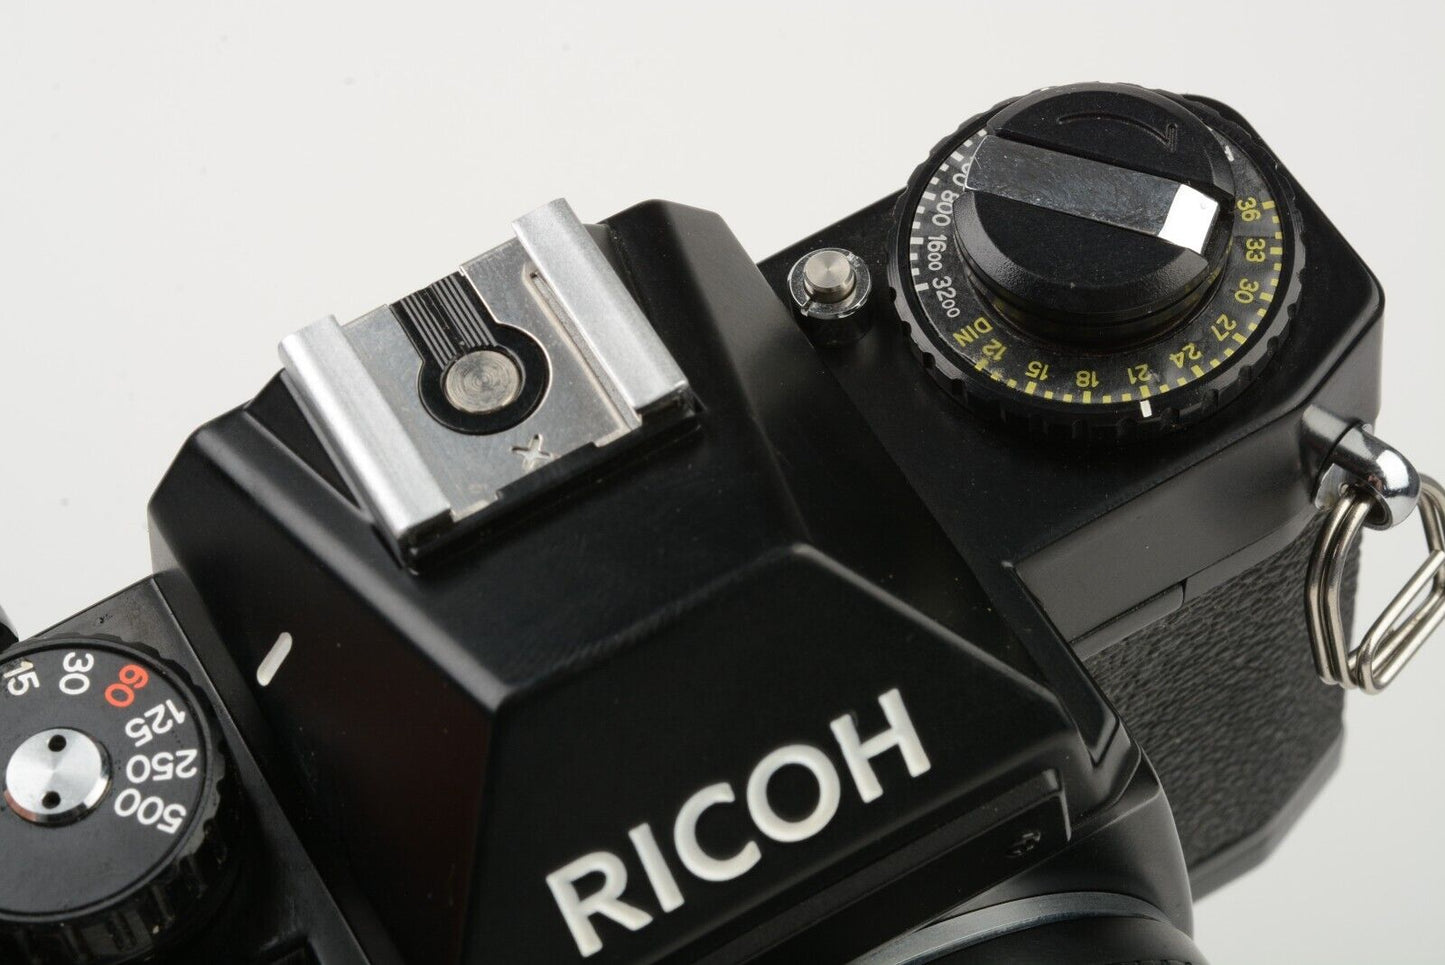 EXC++ RICOH KR-5 35mm SLR MANUAL CAMERA w/55mm f2.2 LENS, NEW SEALS, TESTED NICE